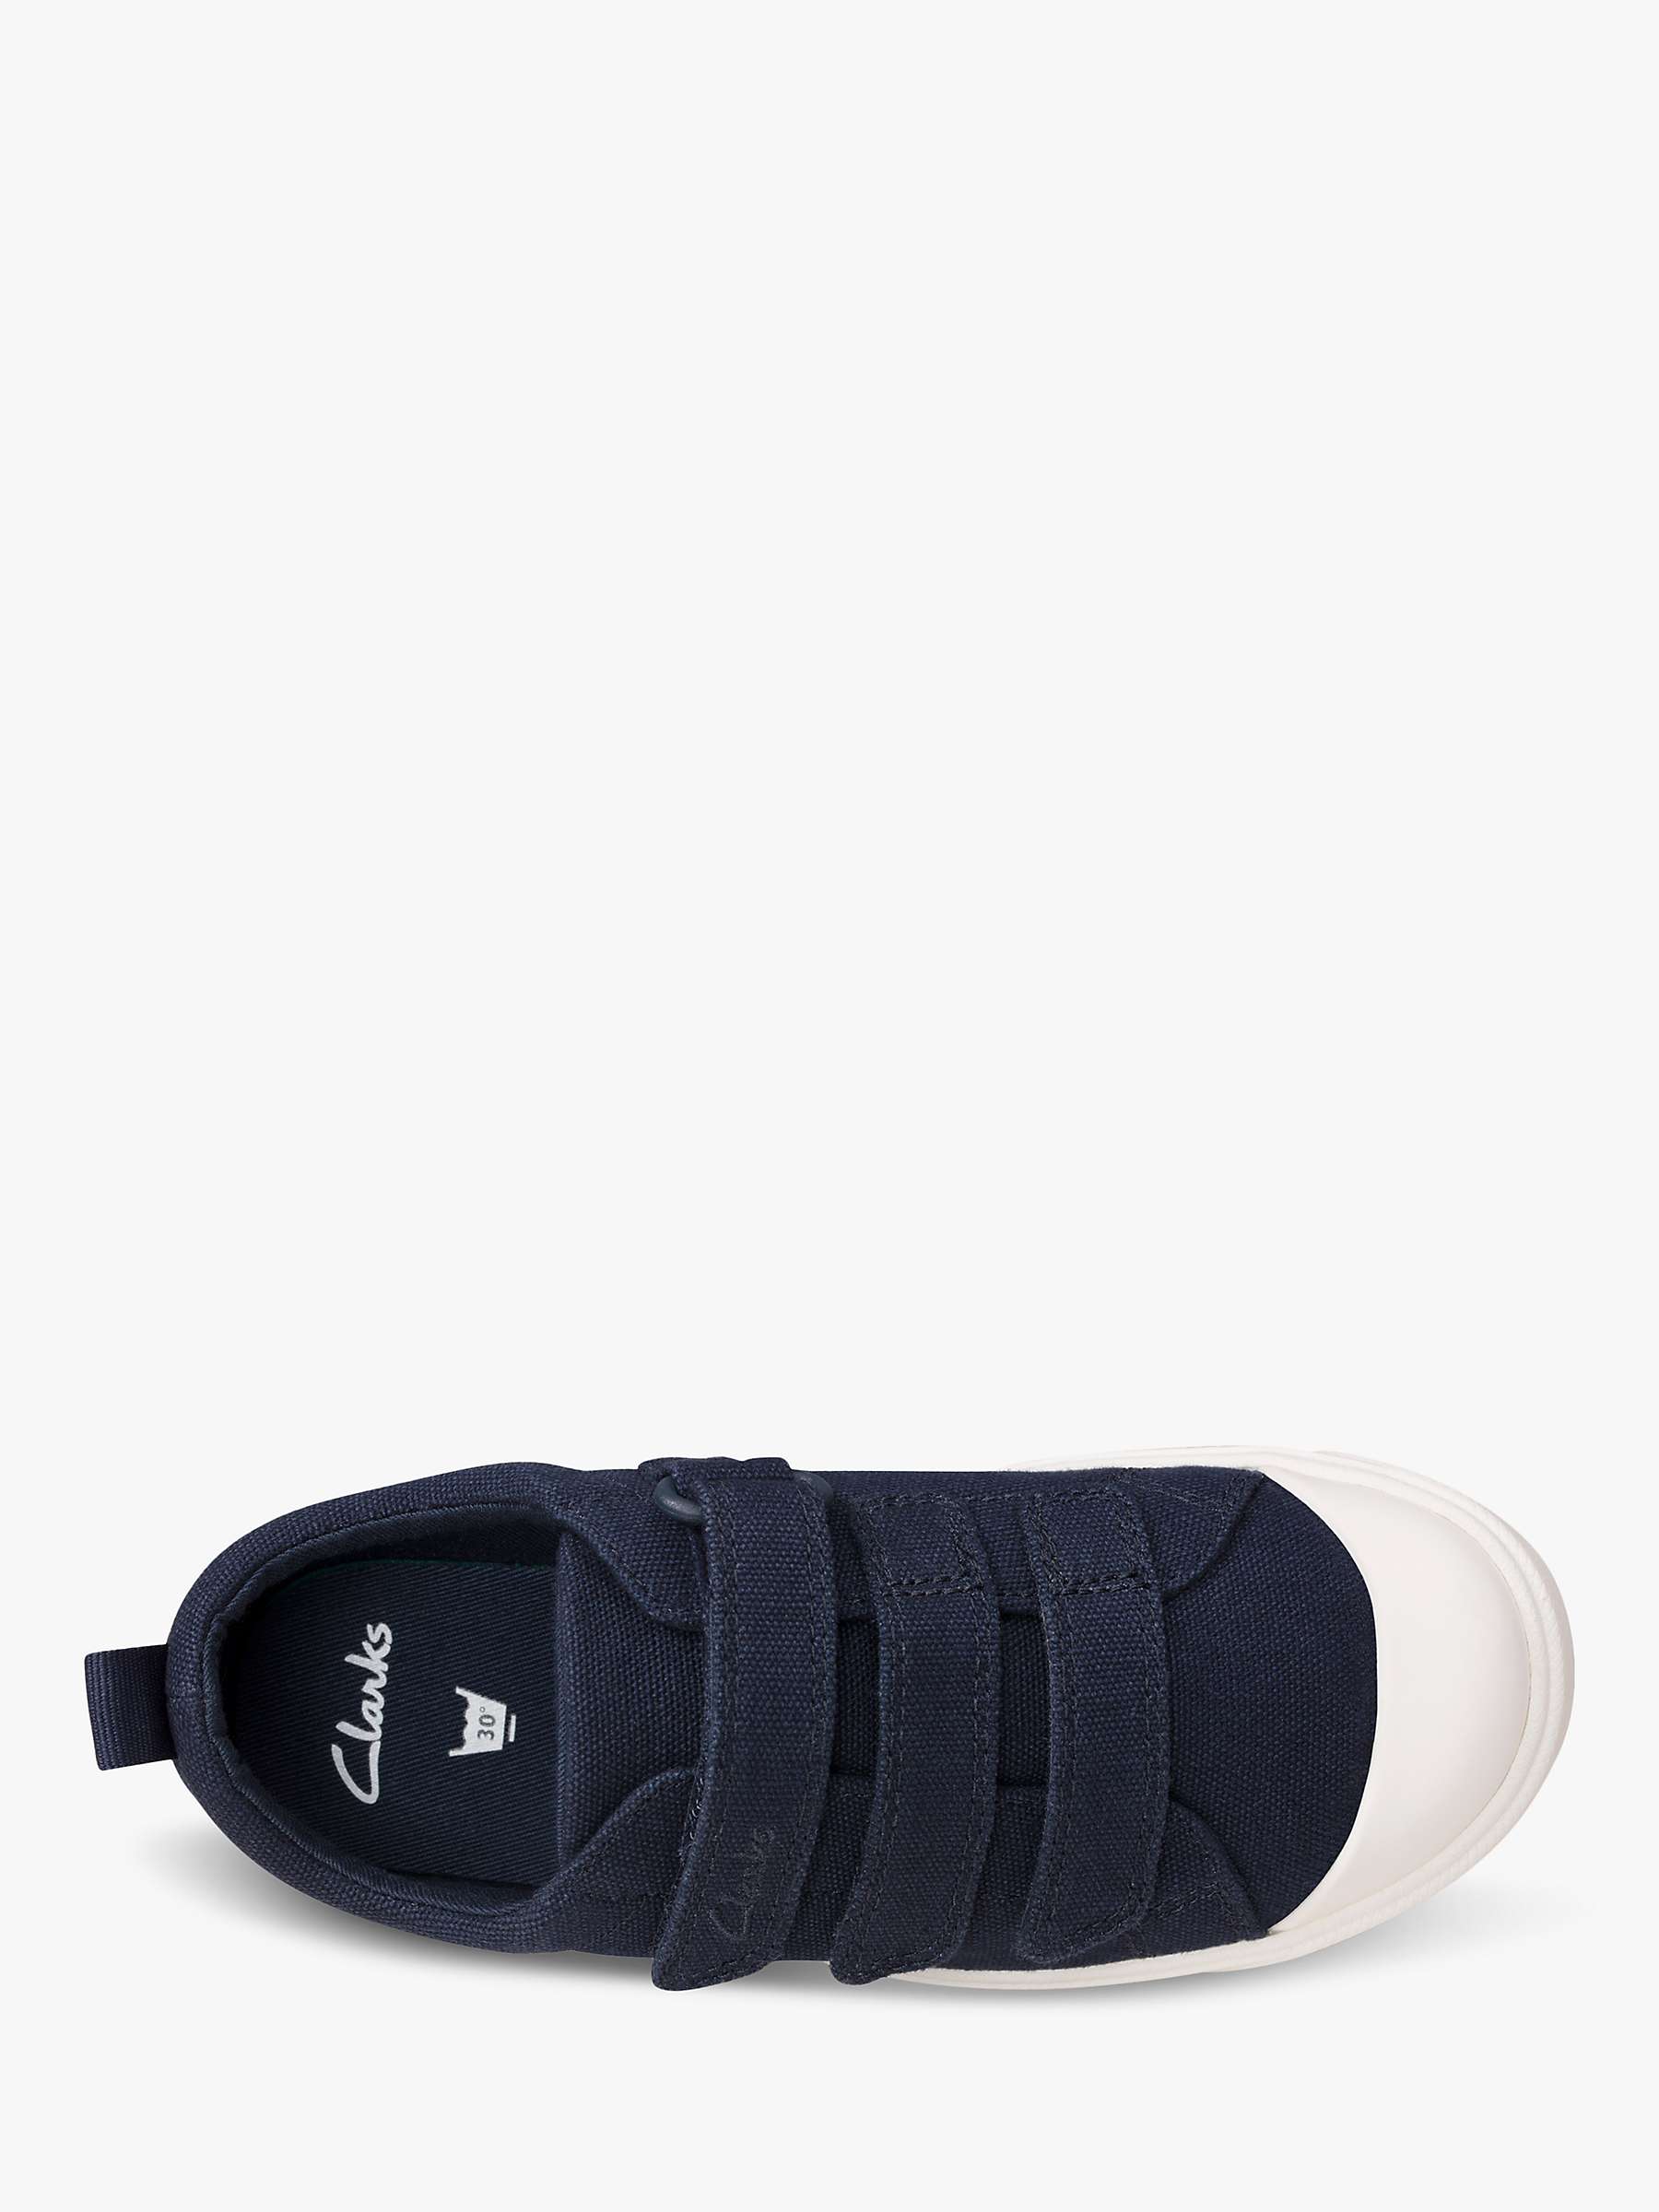 Buy Clarks City Vibe K Trainers Online at johnlewis.com